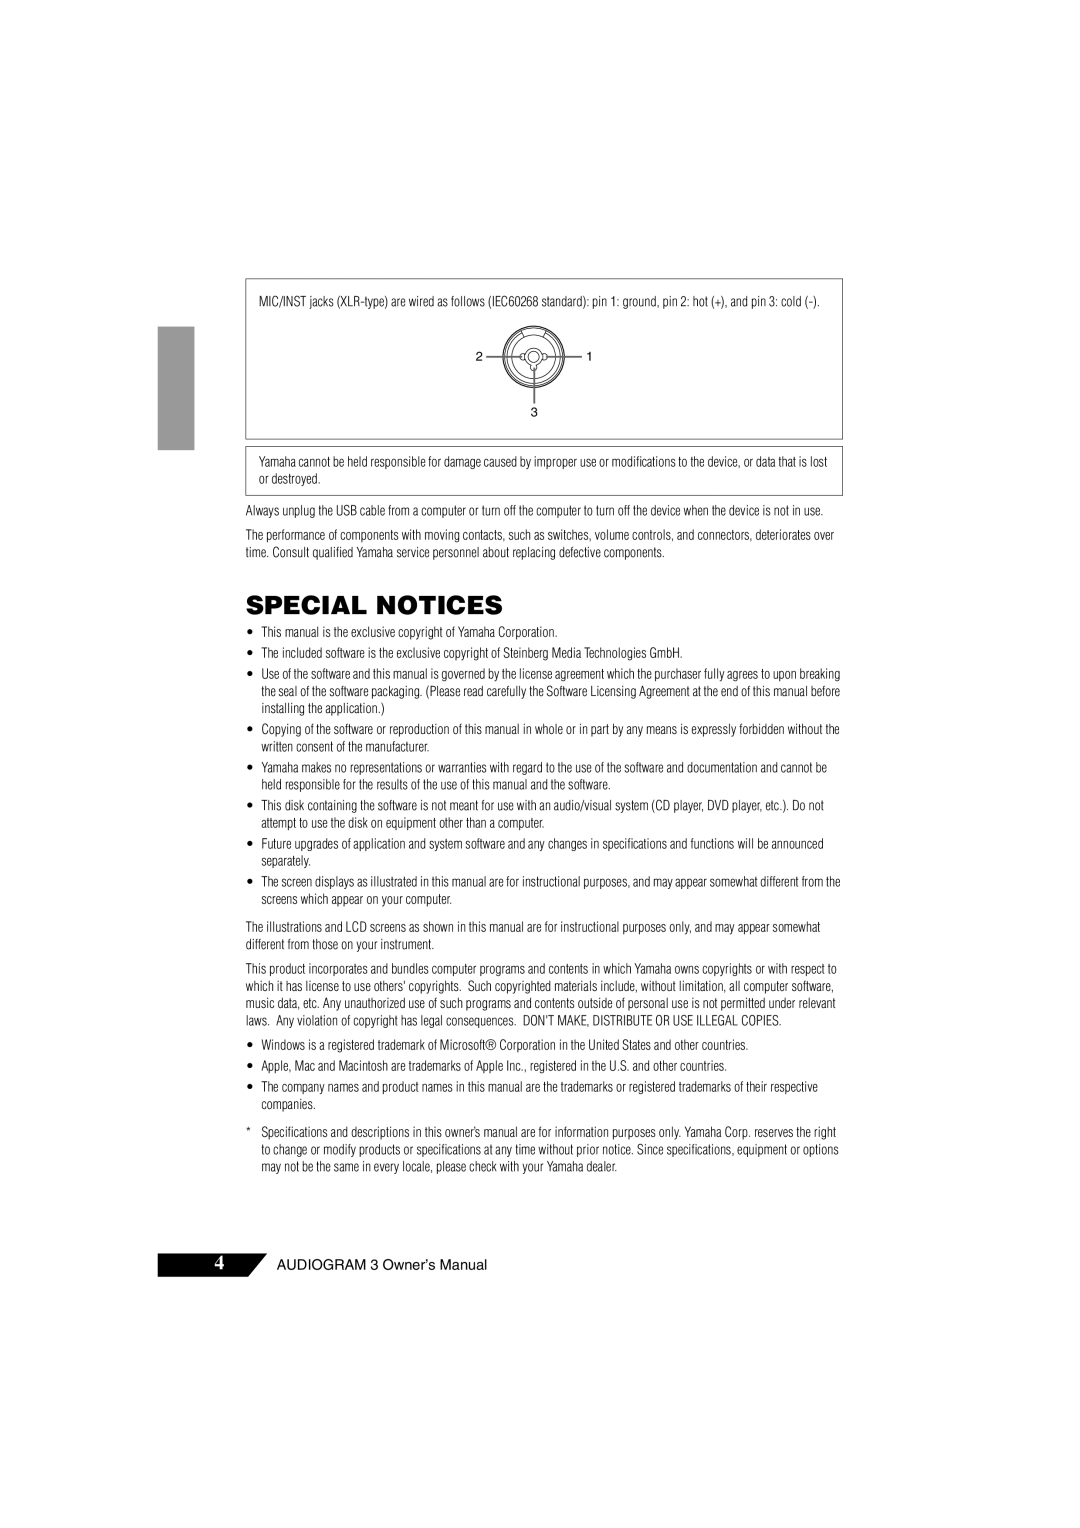 Yamaha Audiogram 3 owner manual Special Notices 